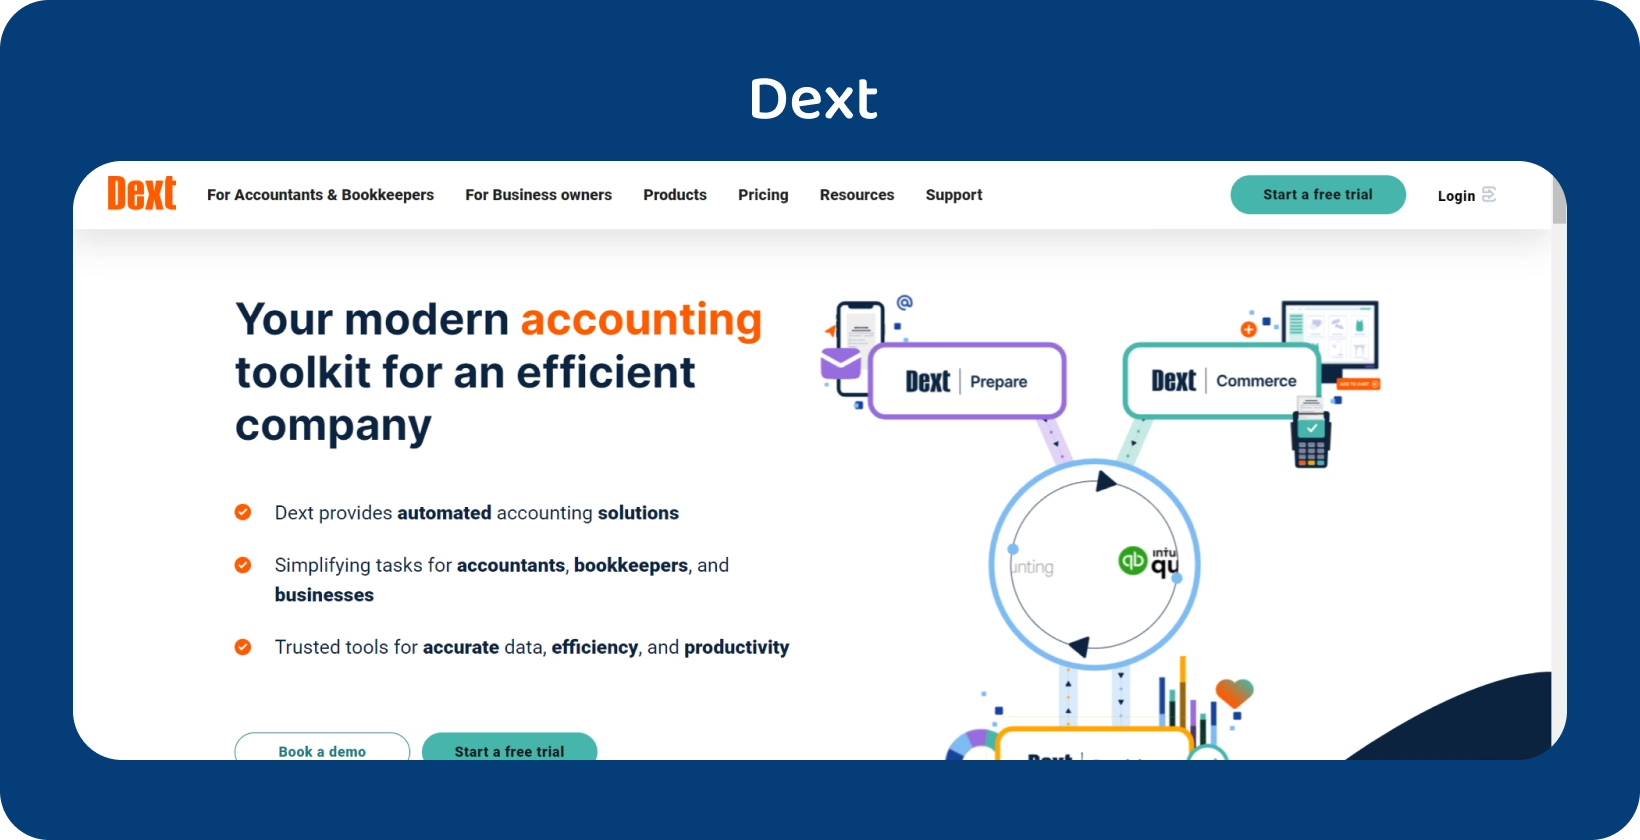 Dext's cutting-edge accounting toolkit interface, highlights automation for professionals in accounting and bookkeeping.